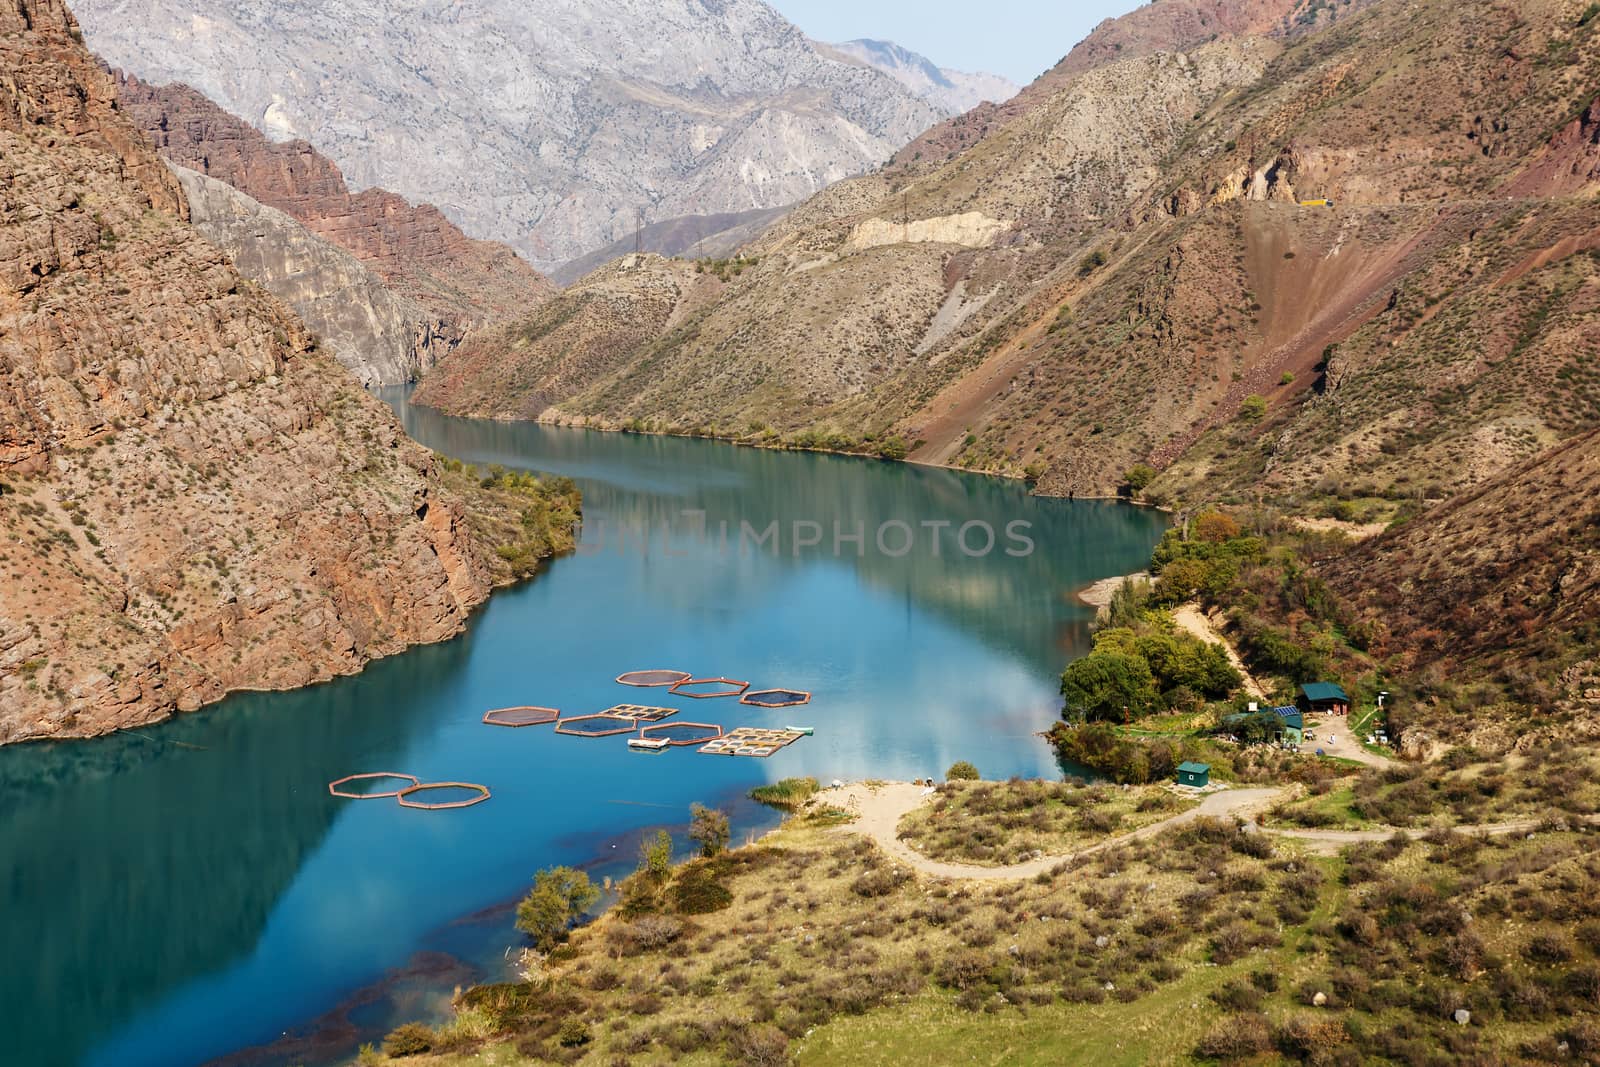 Naryn River in the Tian Shan mountains in Kyrgyzstan. fish farm on the river.